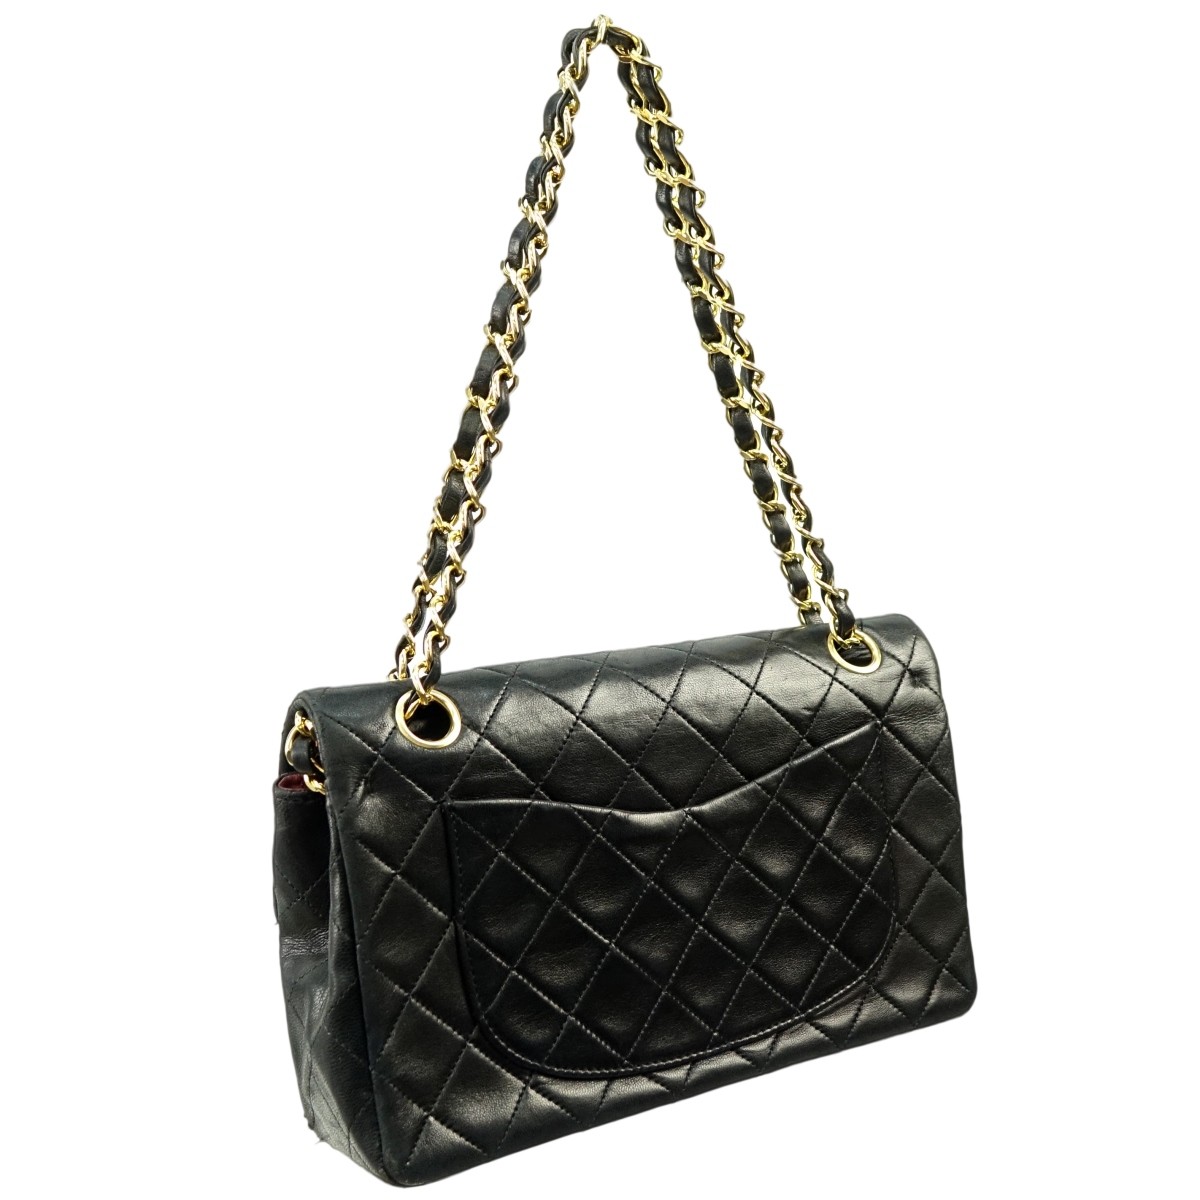 Chanel Black Quilted Leather Double Flap Bag 23